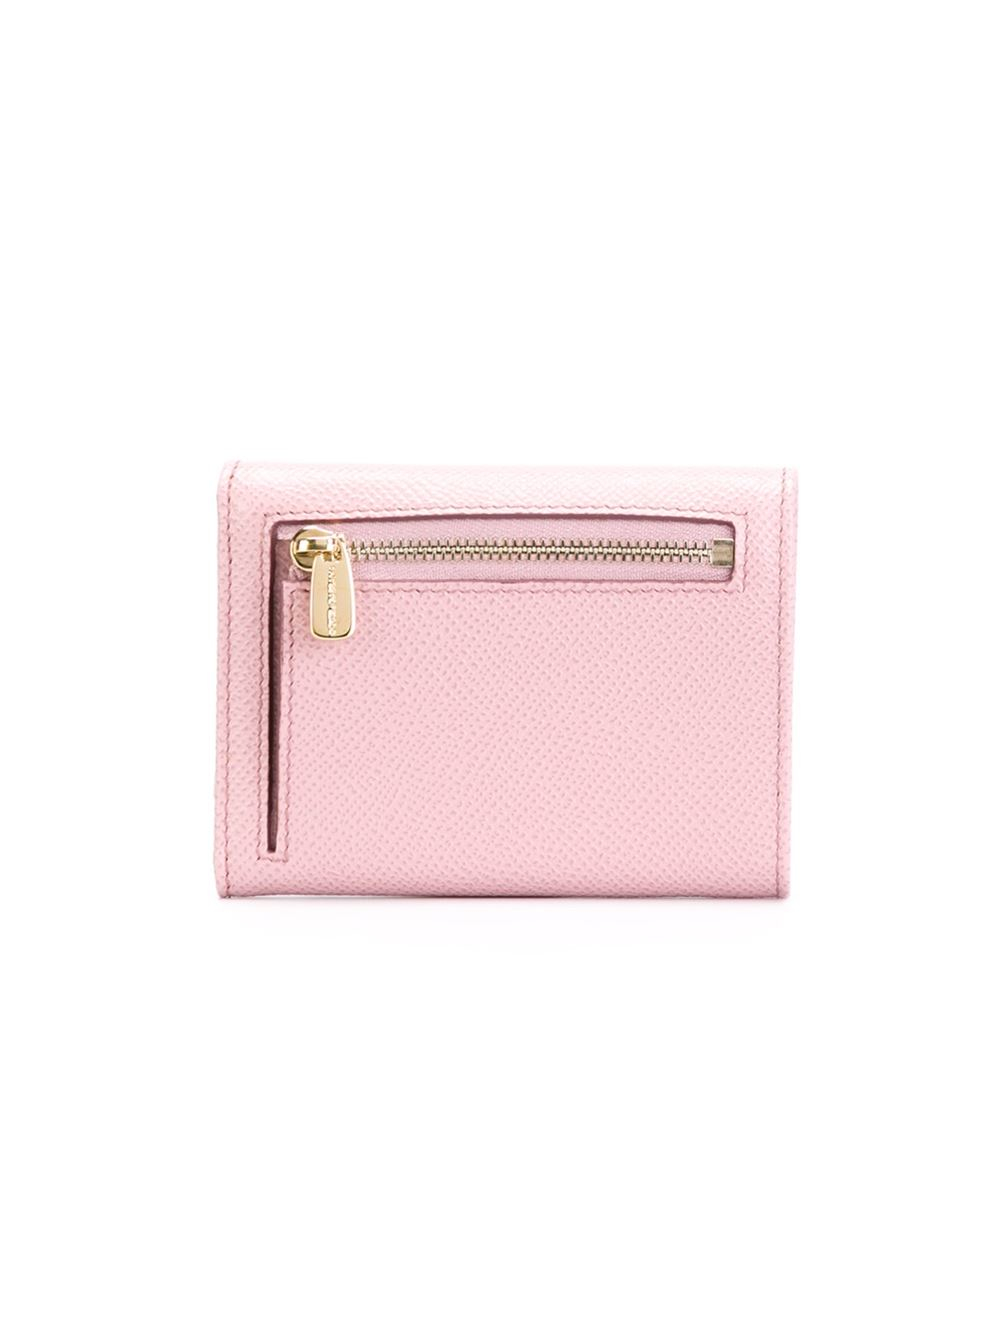 Lyst - Dolce & Gabbana Small 'continental' Wallet in Pink